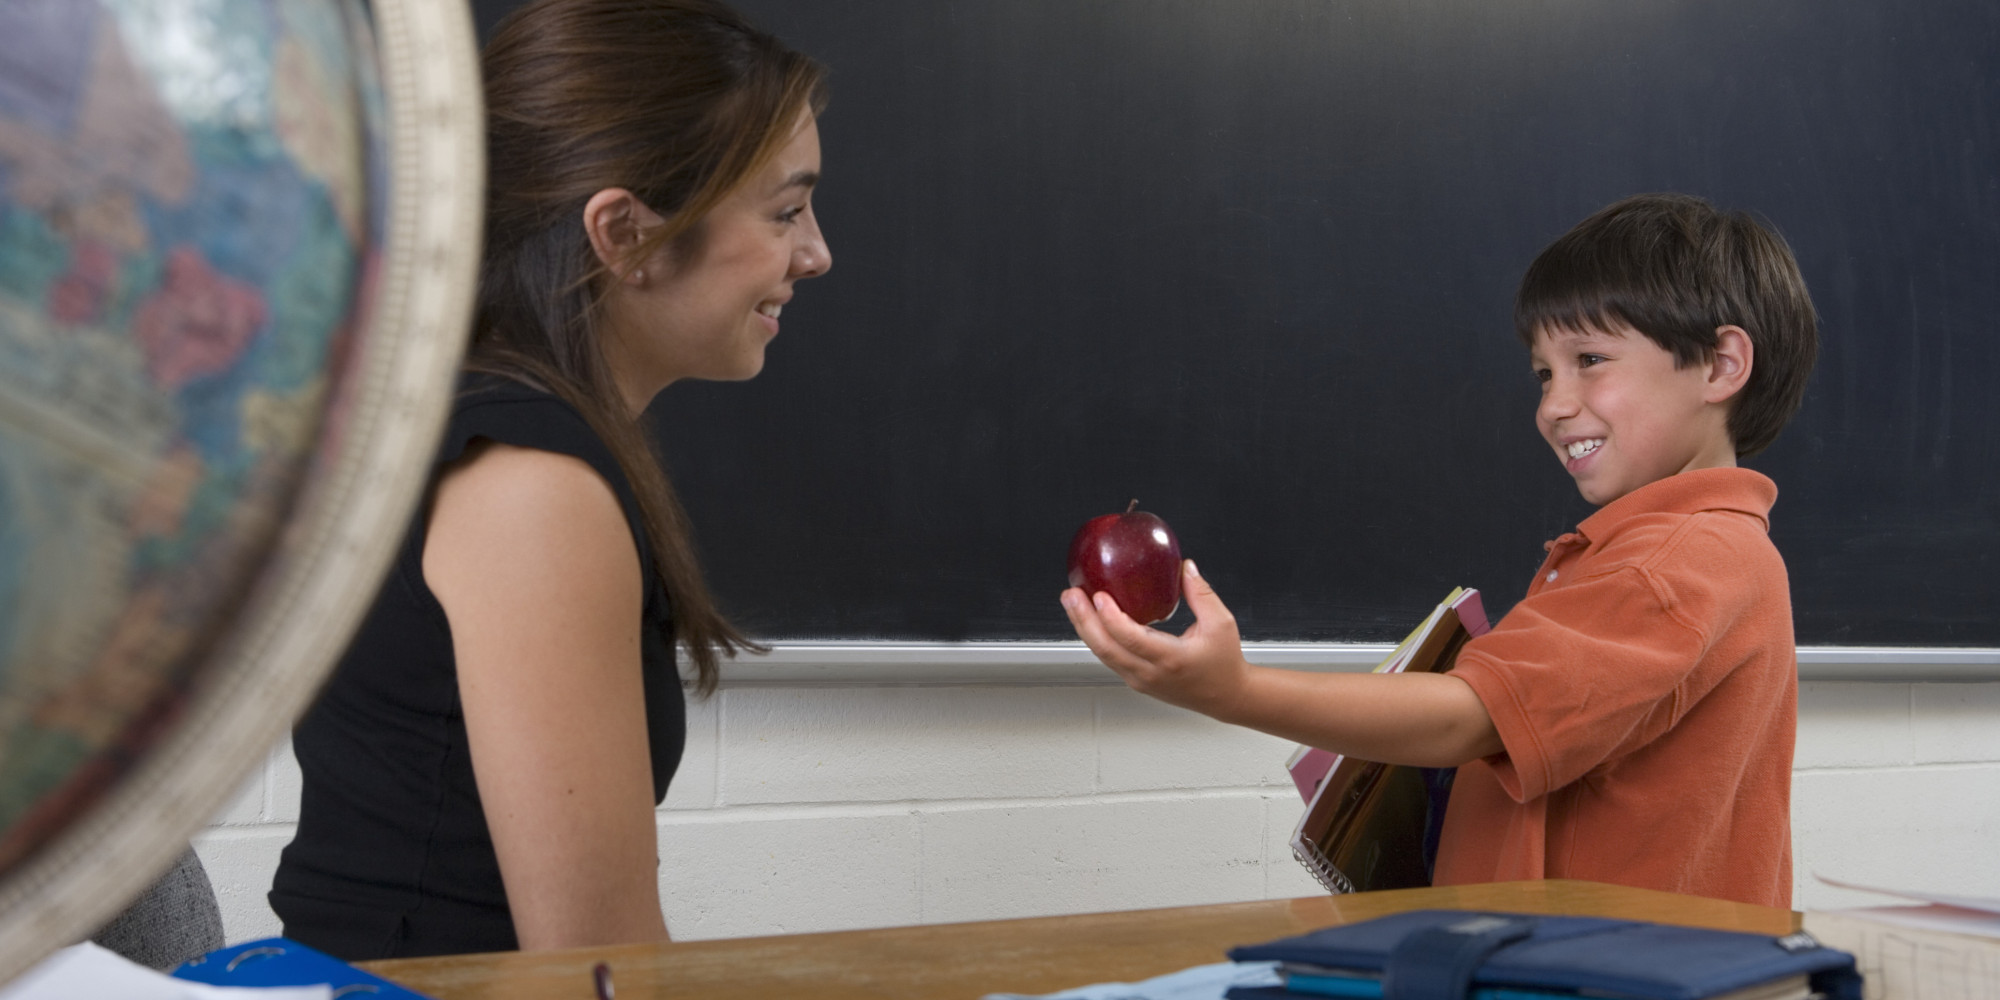 These Are The Best Gifts Teachers Have Ever Received From Students | HuffPost2000 x 1000